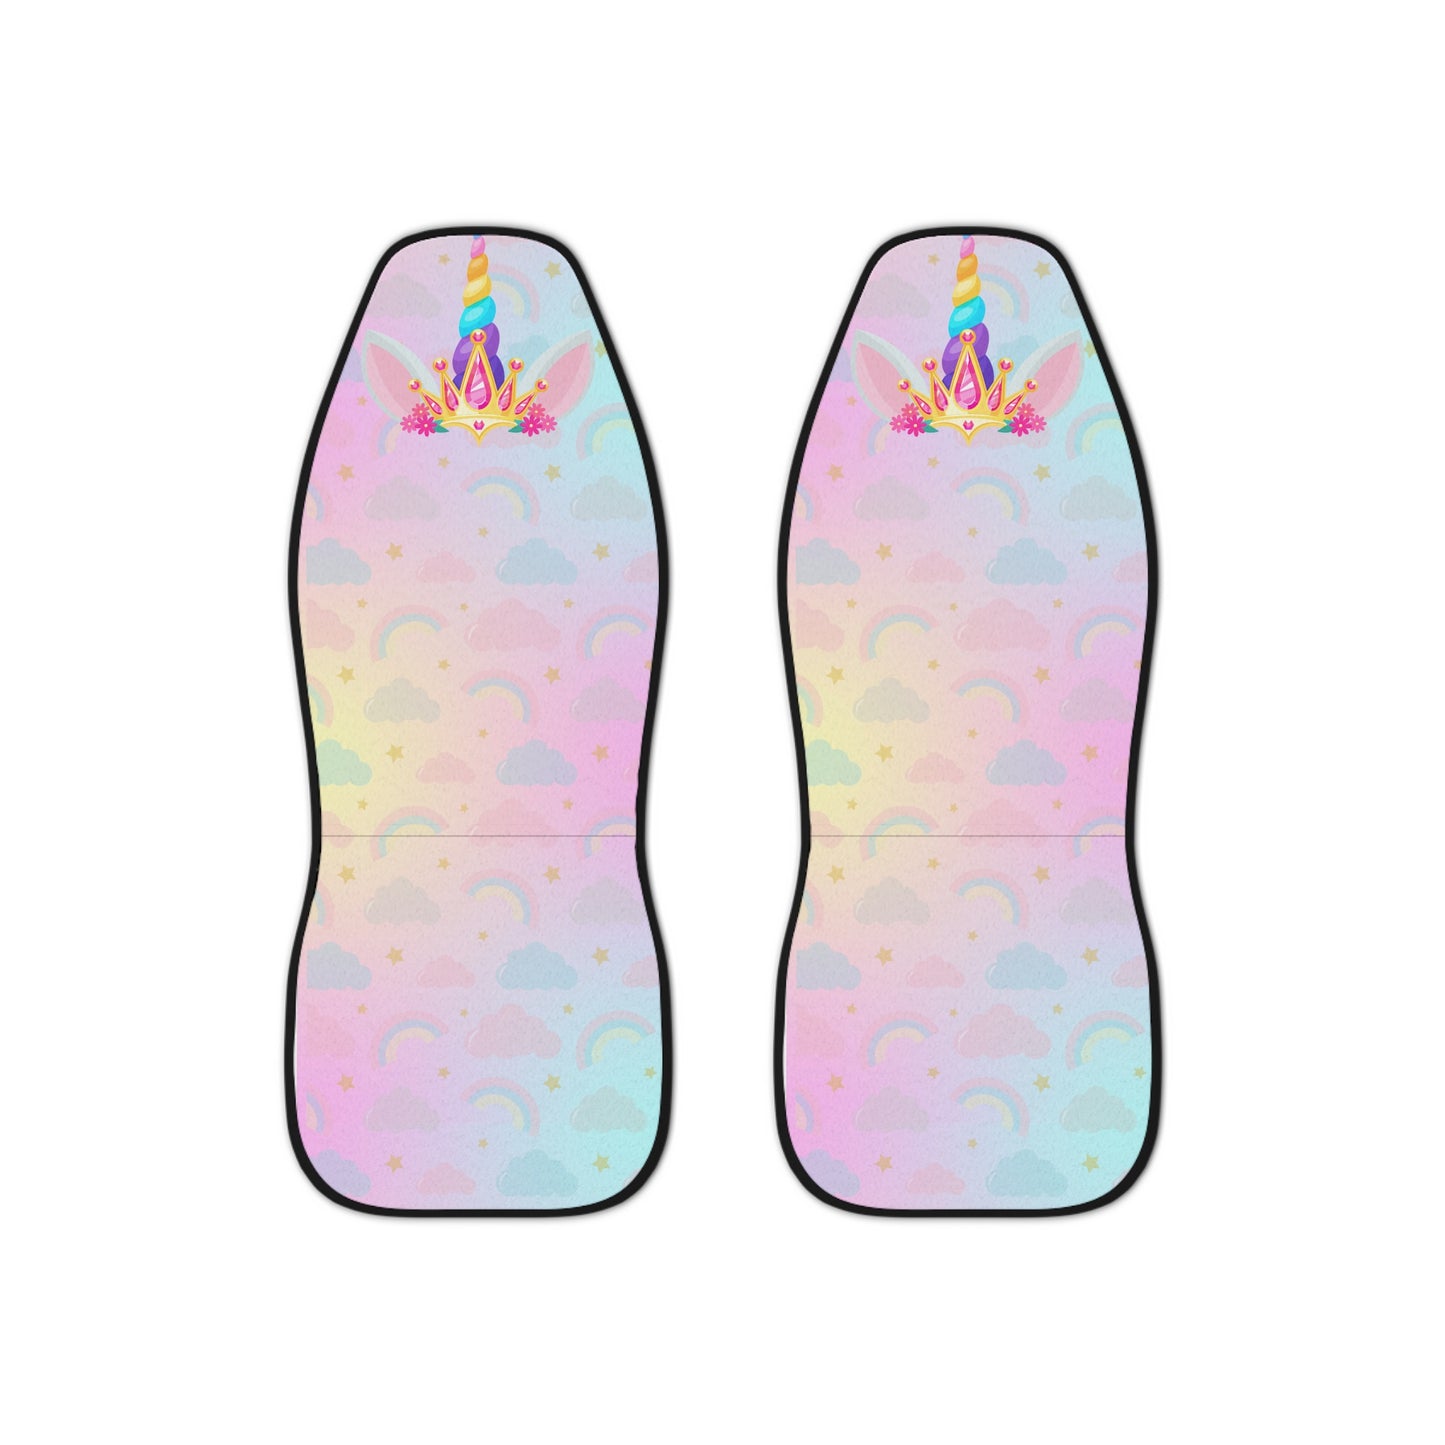 Unicorn Princess Queen Pink Blue & Yellow Colorful Rainbow Car Seat Covers